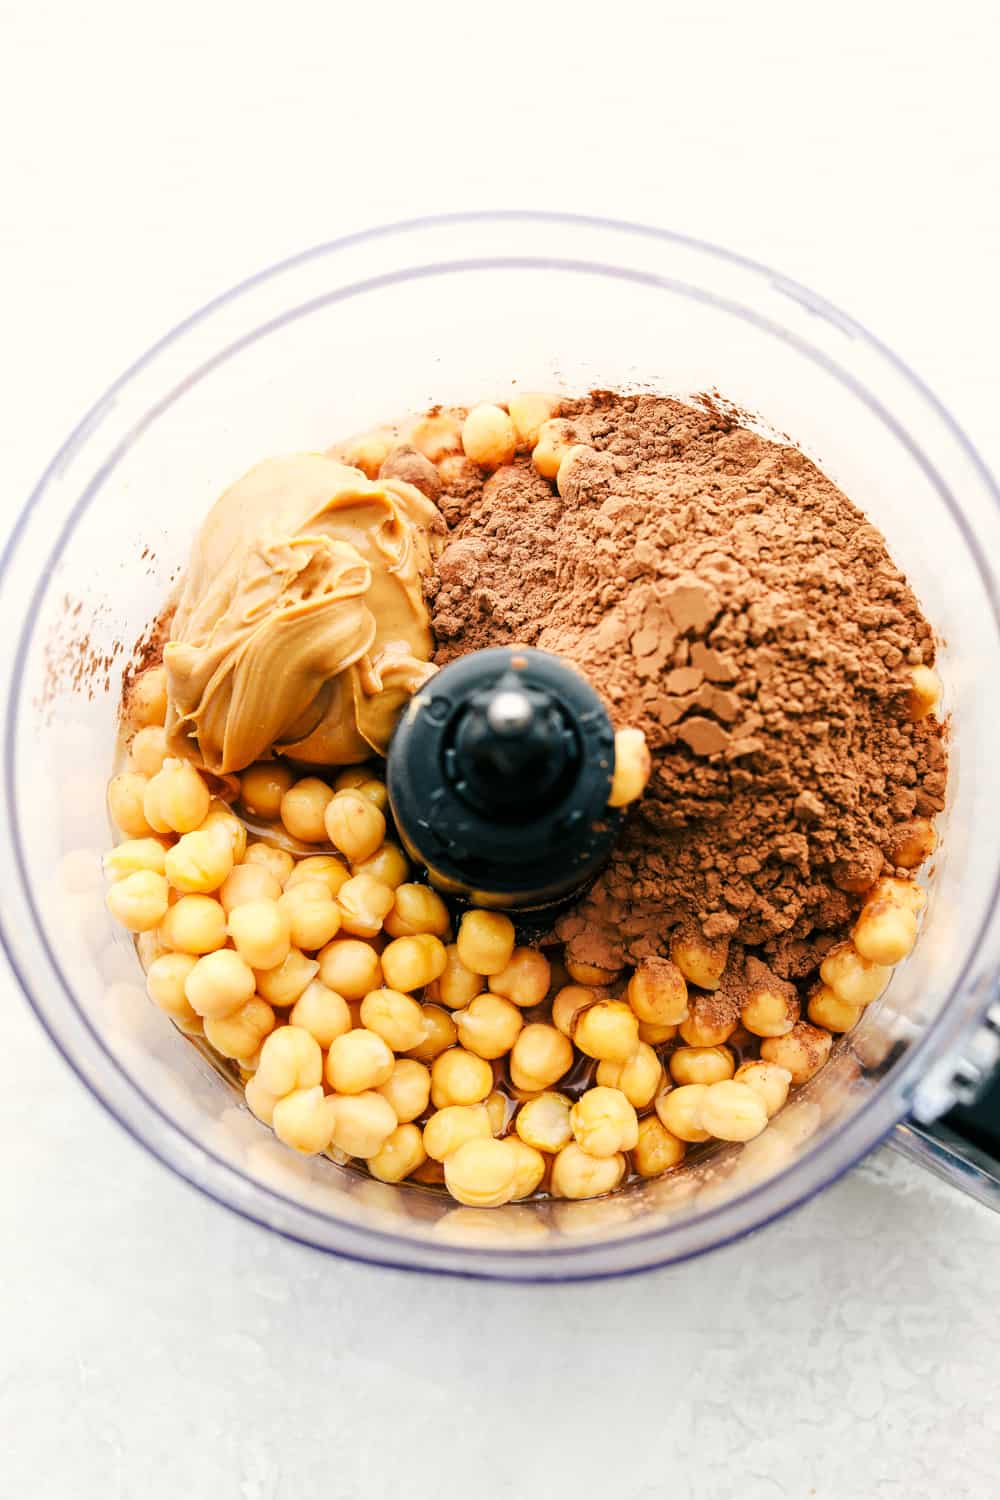 A food processor with the ingredients for chocolate hummus.